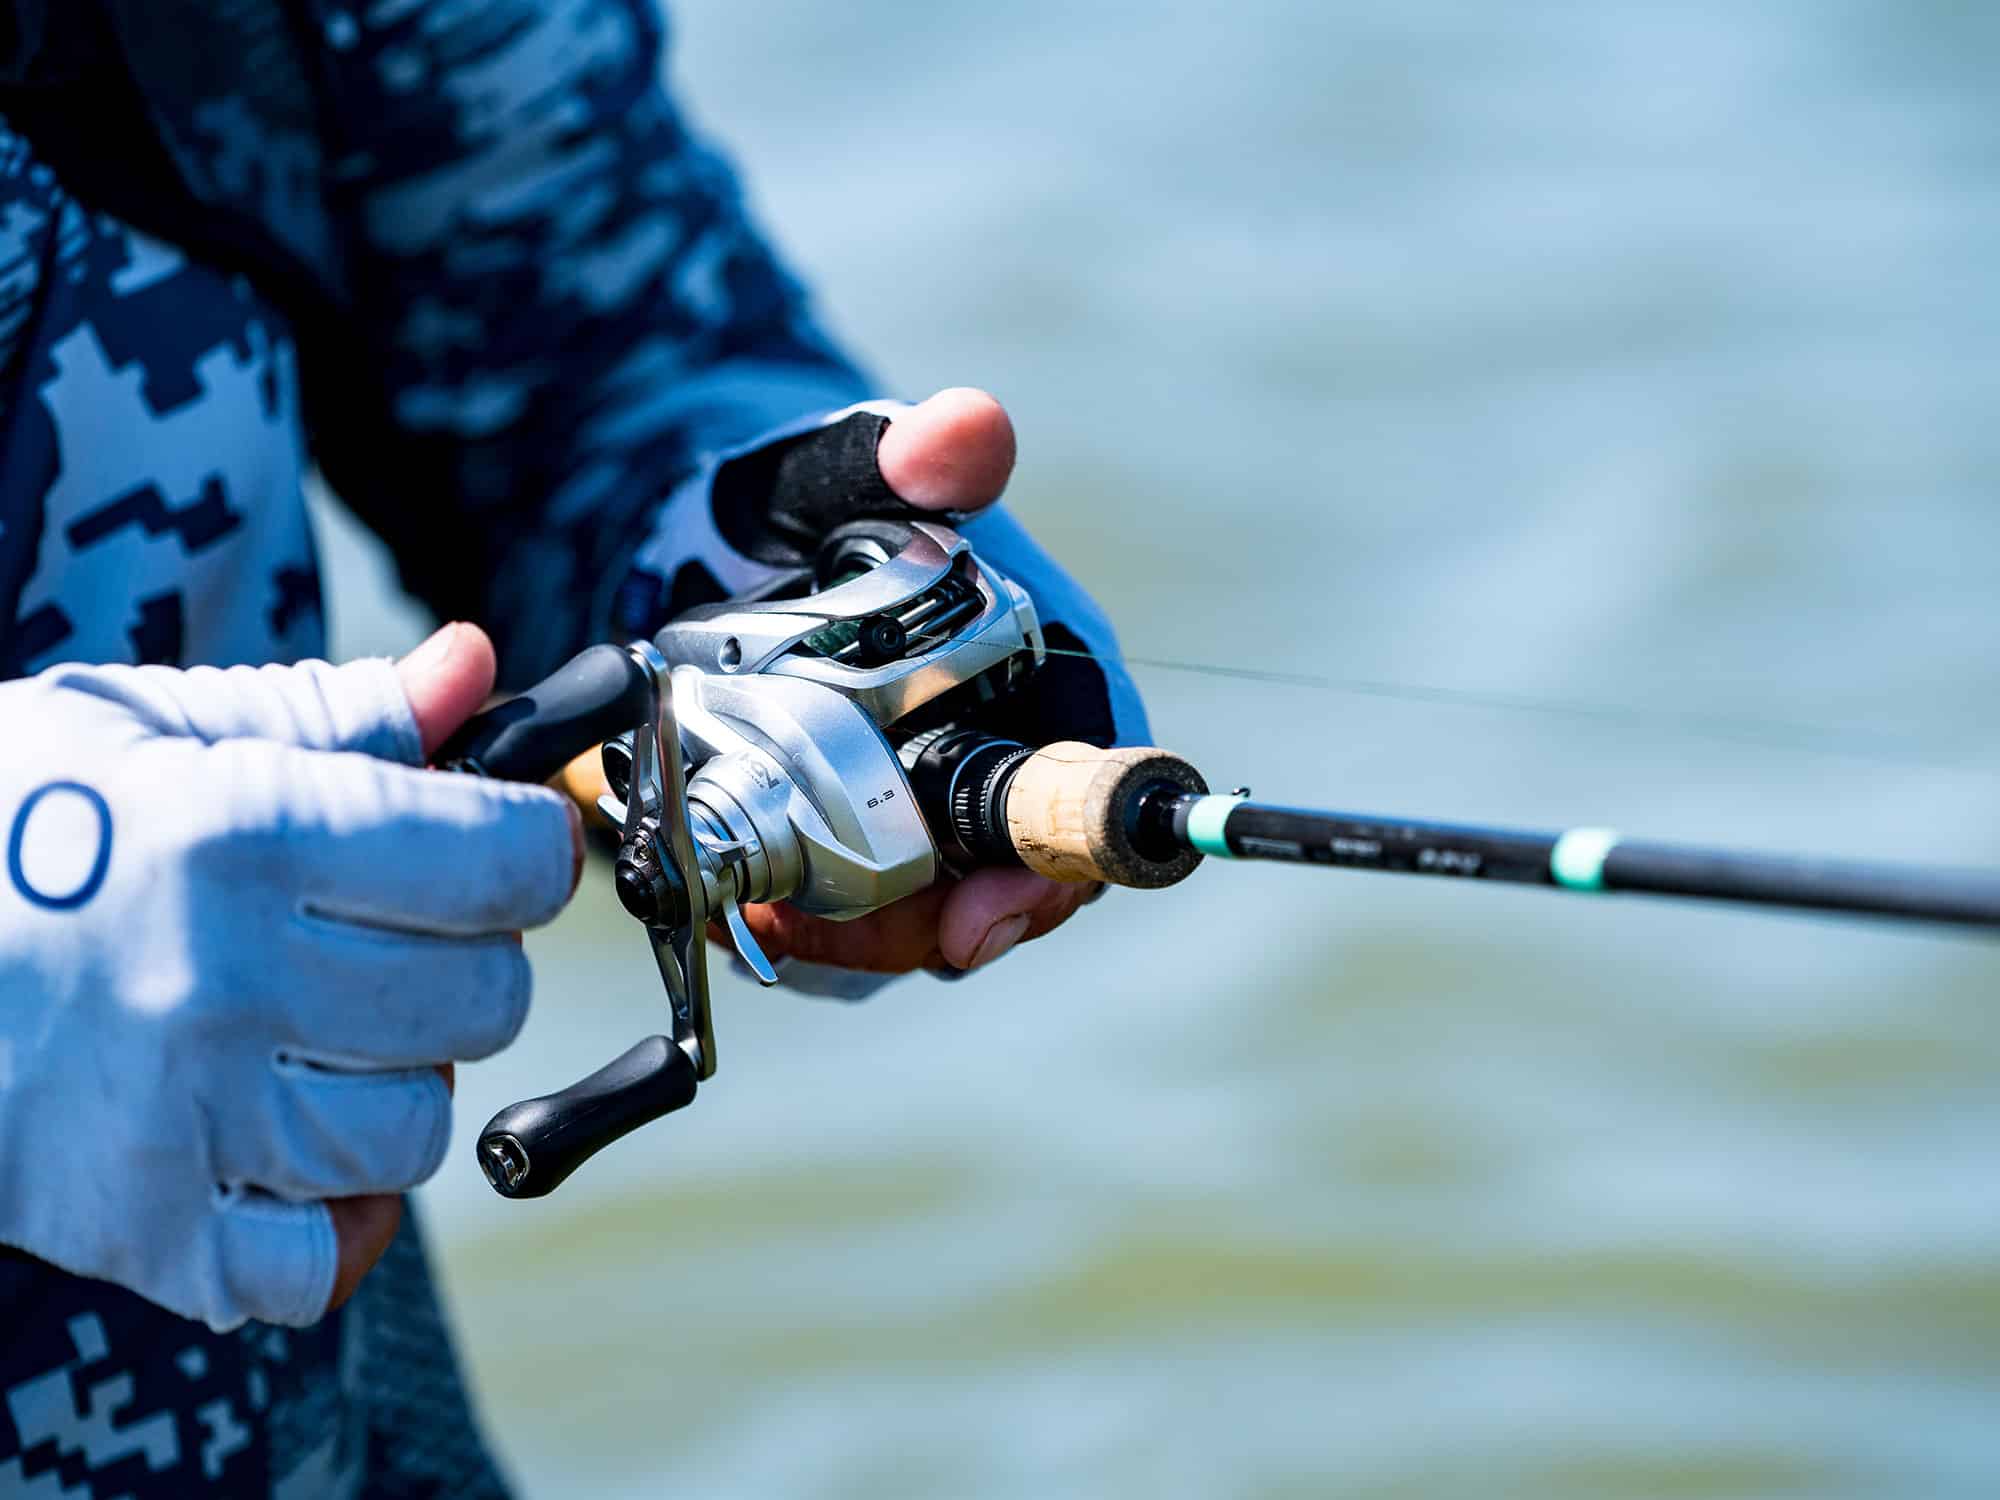 How To Select The Best Baitcaster For Speckled Trout And Redfish